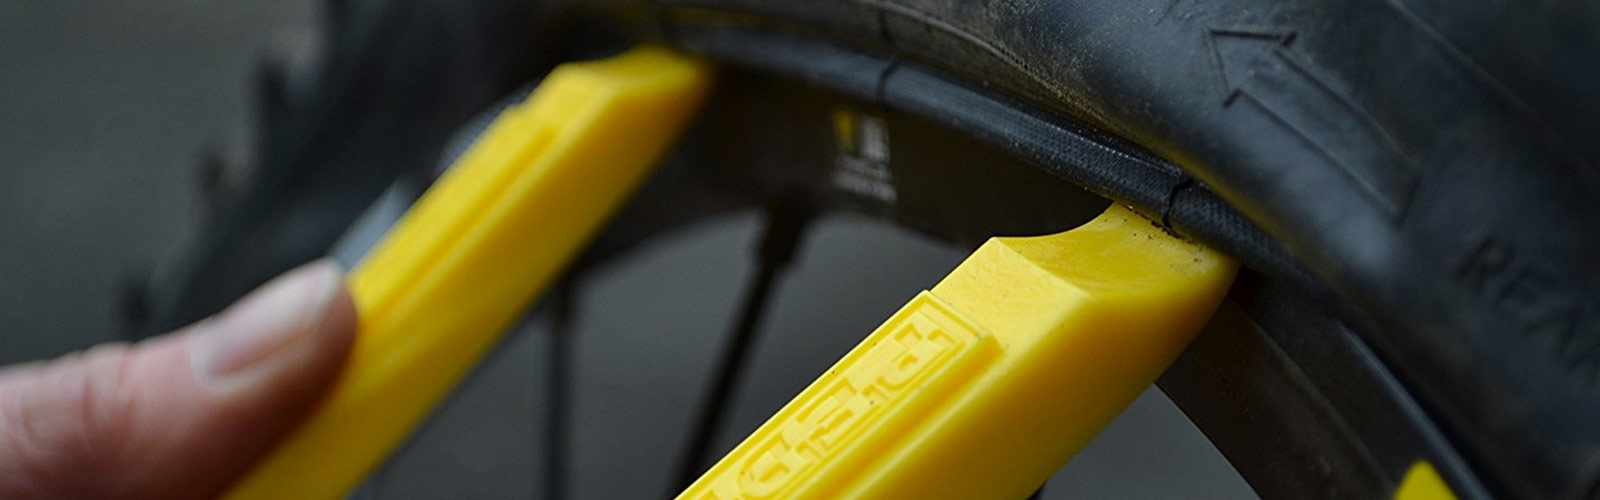 Shop bike tire levers for easy flat tire fix